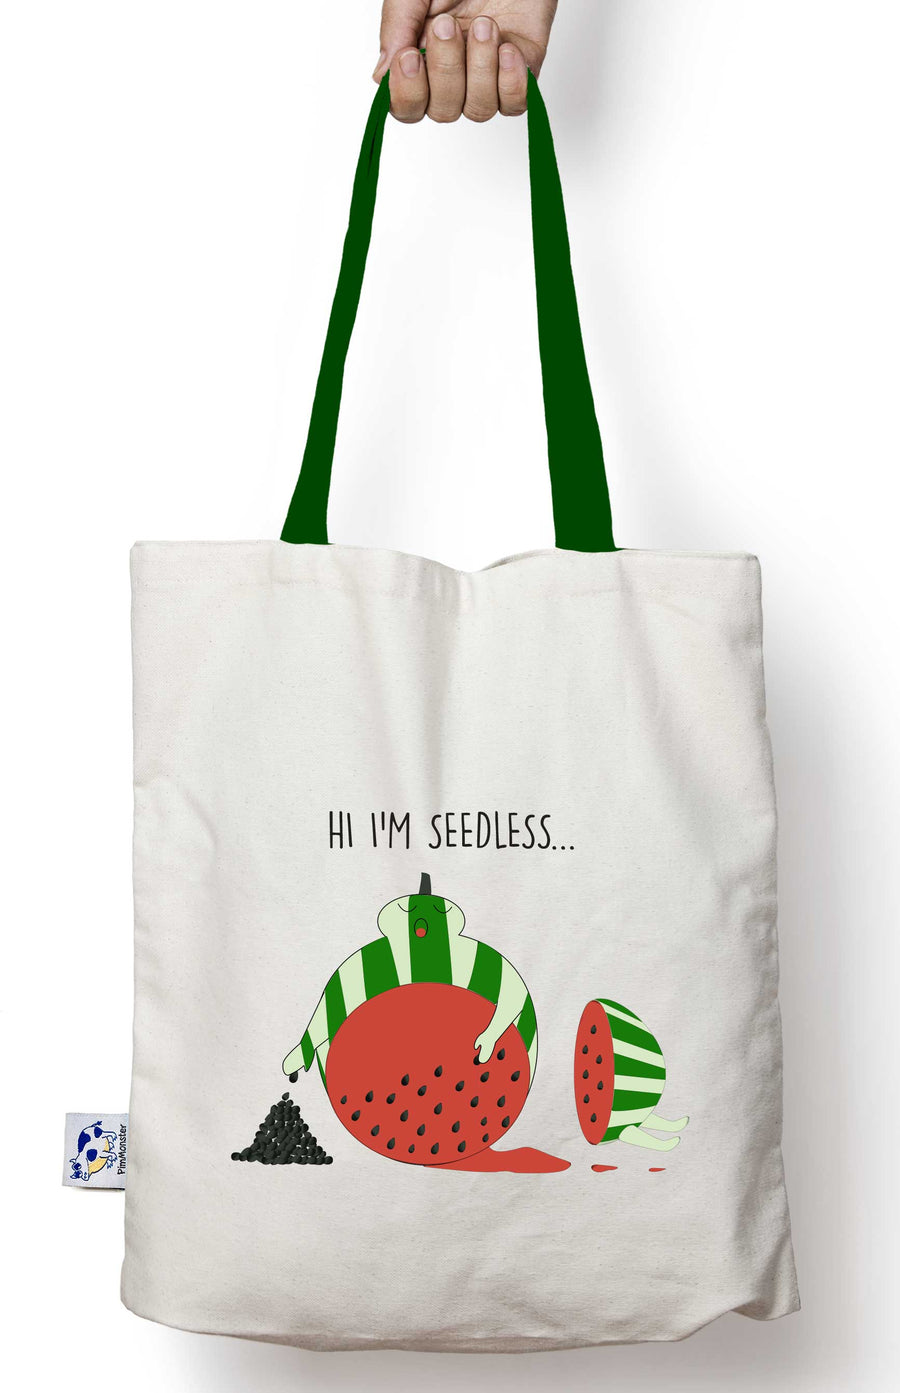 The Seedless tote bag - Pimmonster